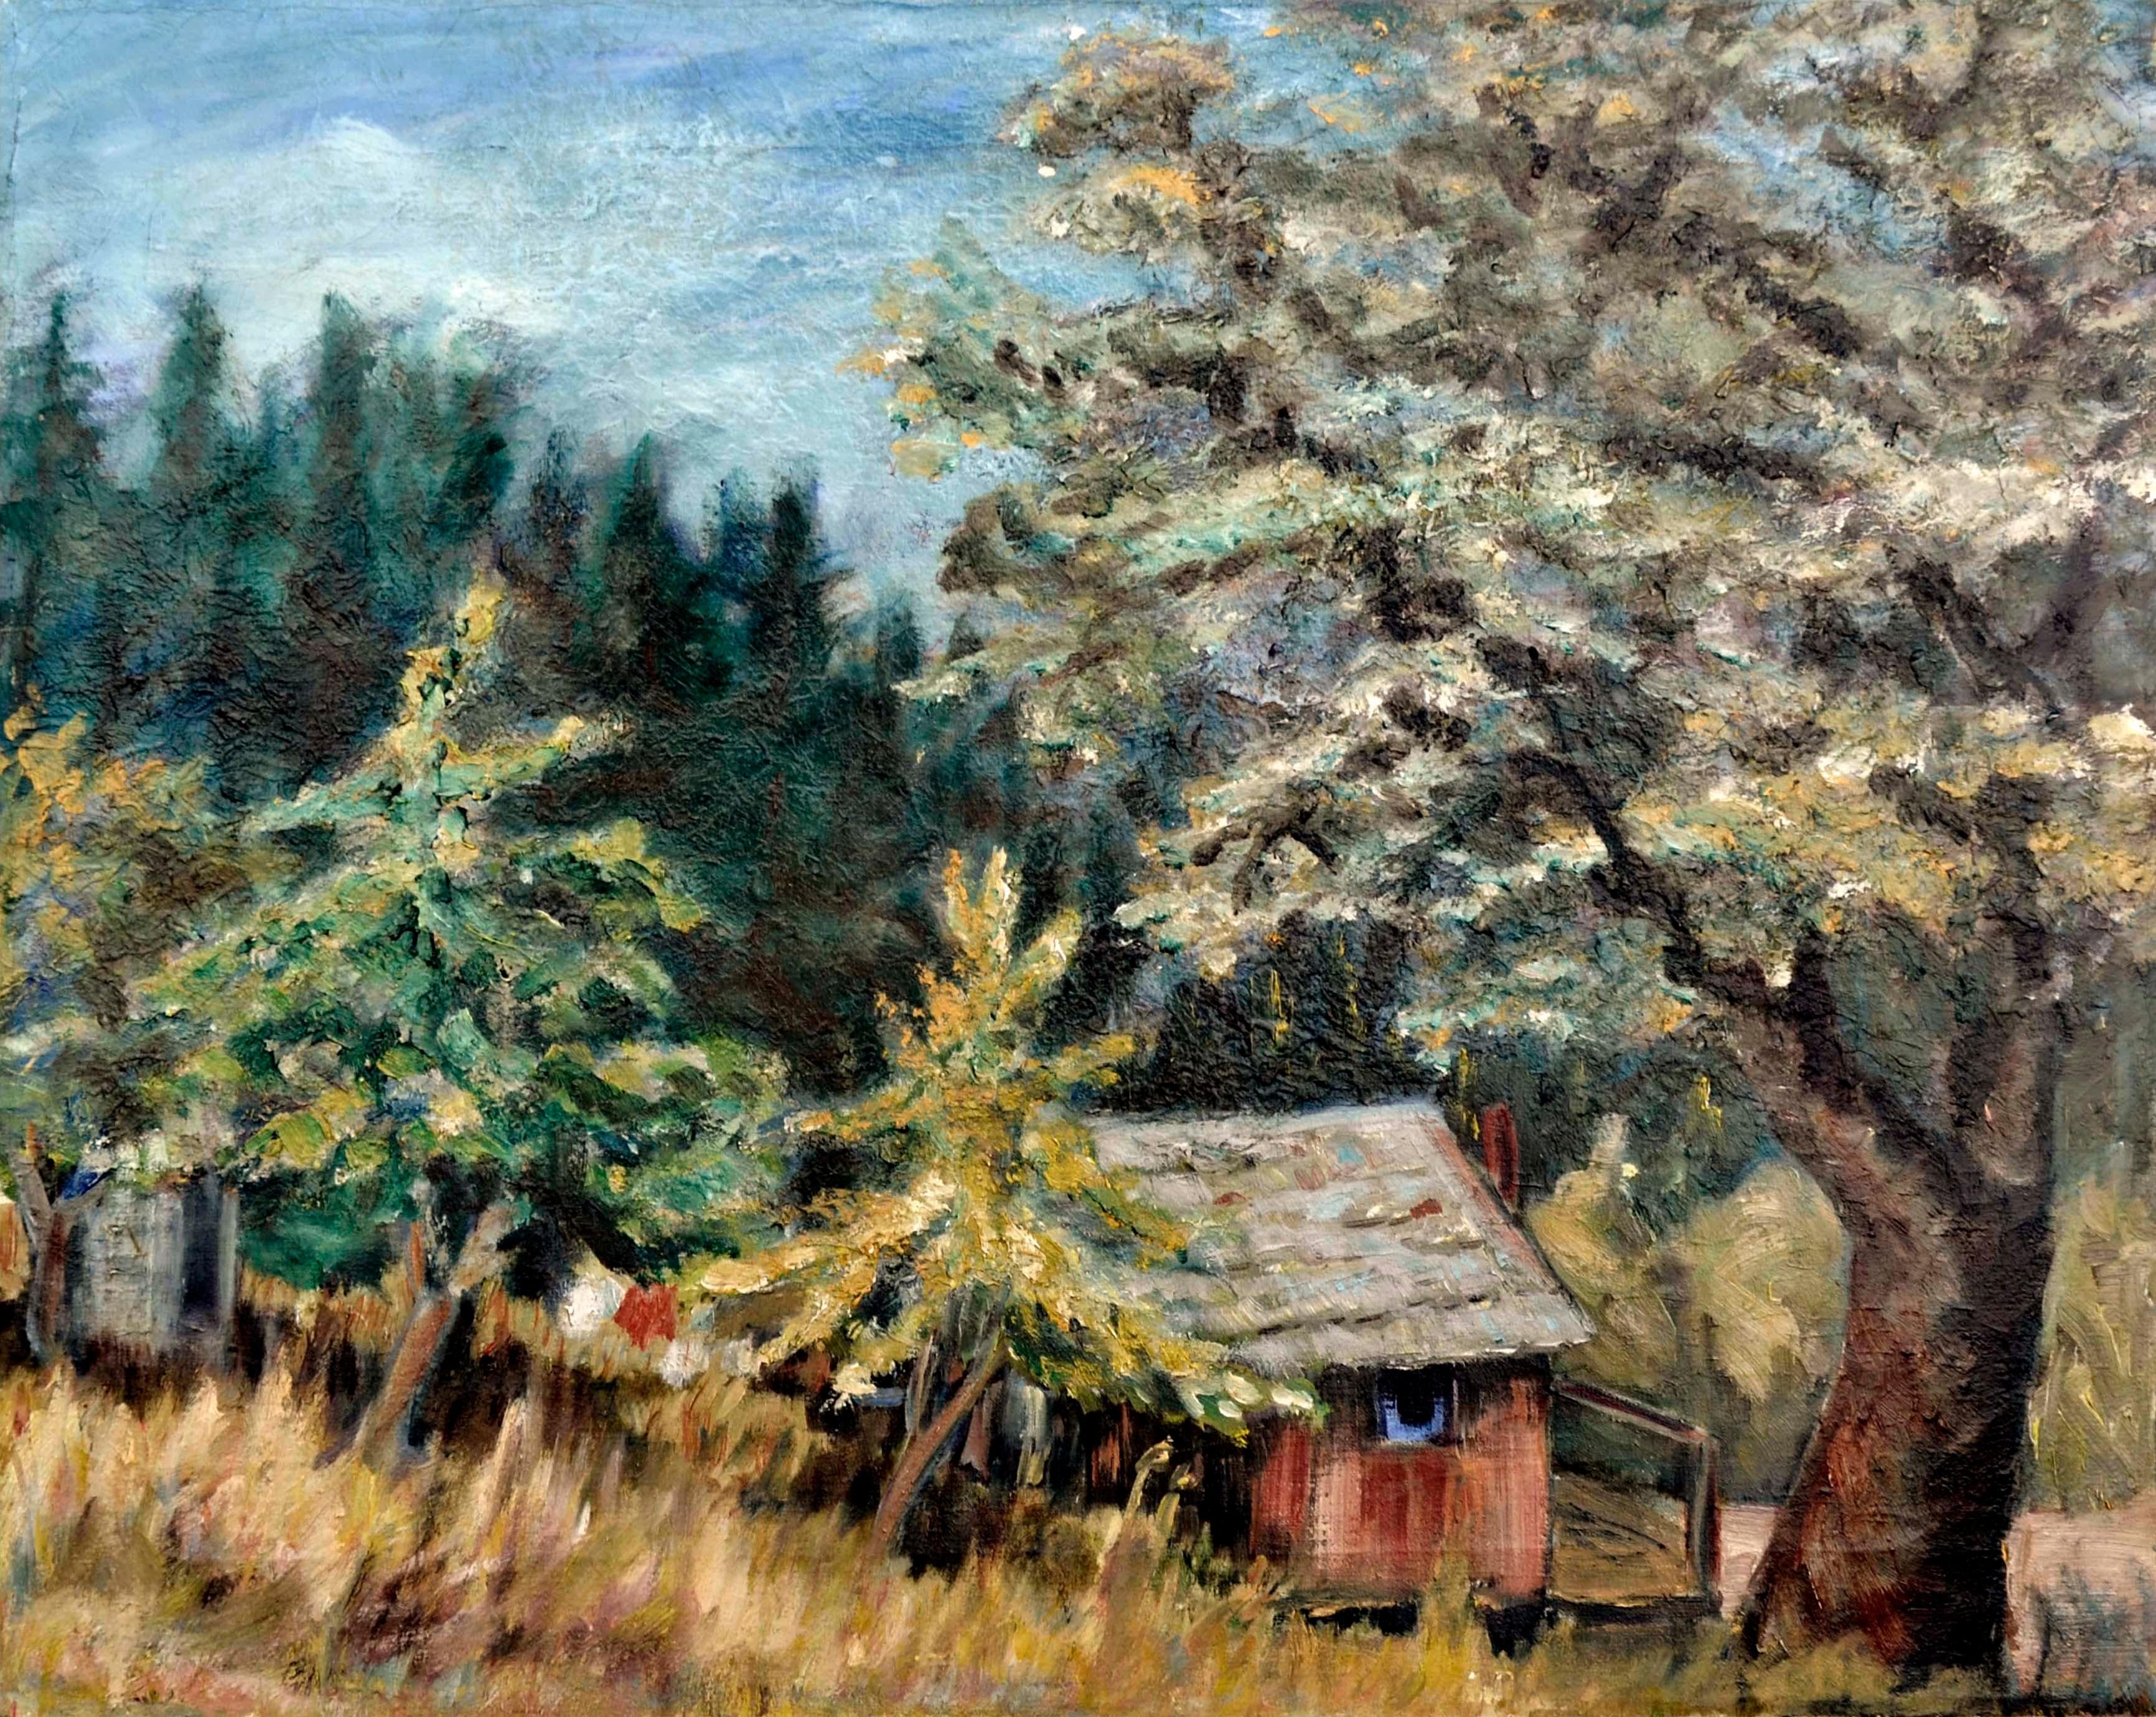 N.C. McNickle Landscape Painting - Cabin in the Trees Landscape 